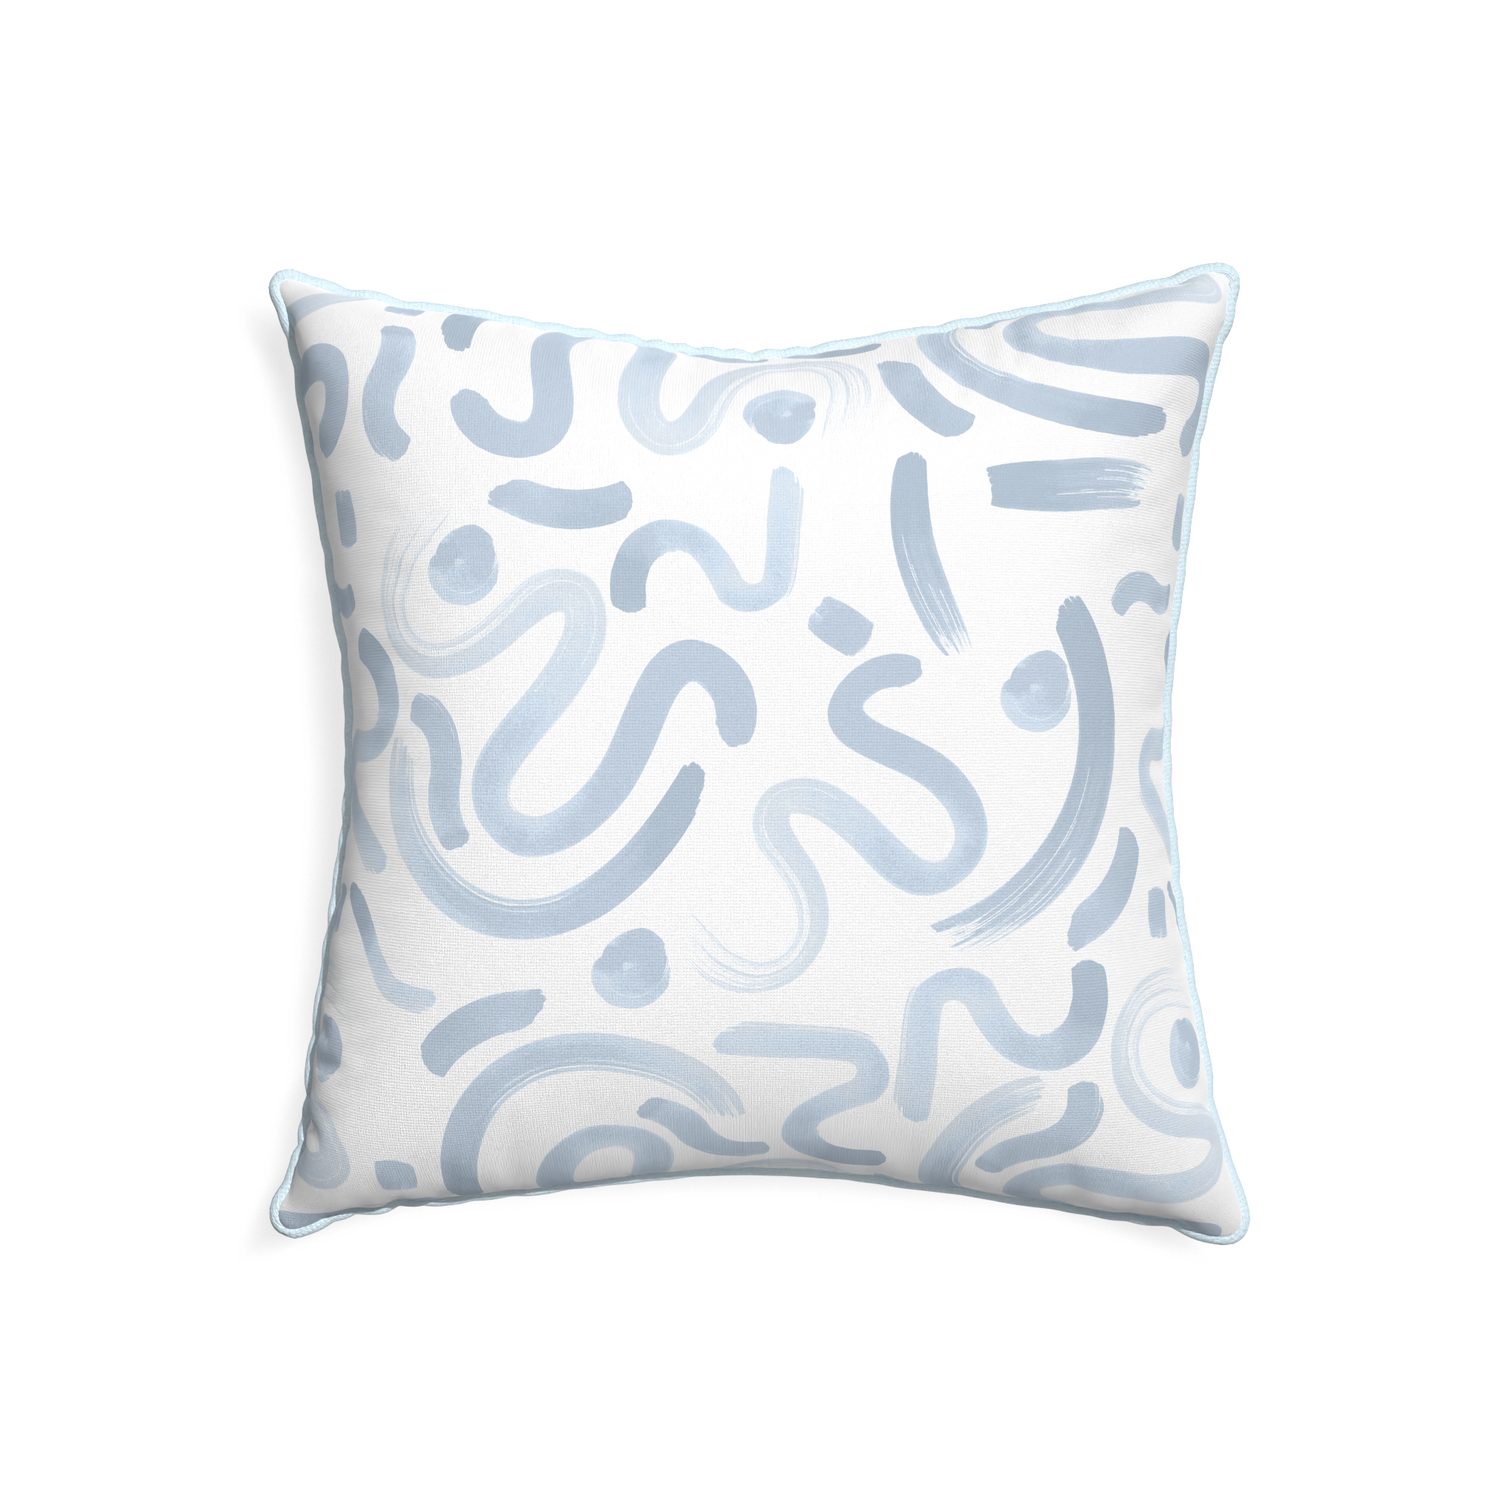 22-square hockney sky custom pillow with powder piping on white background